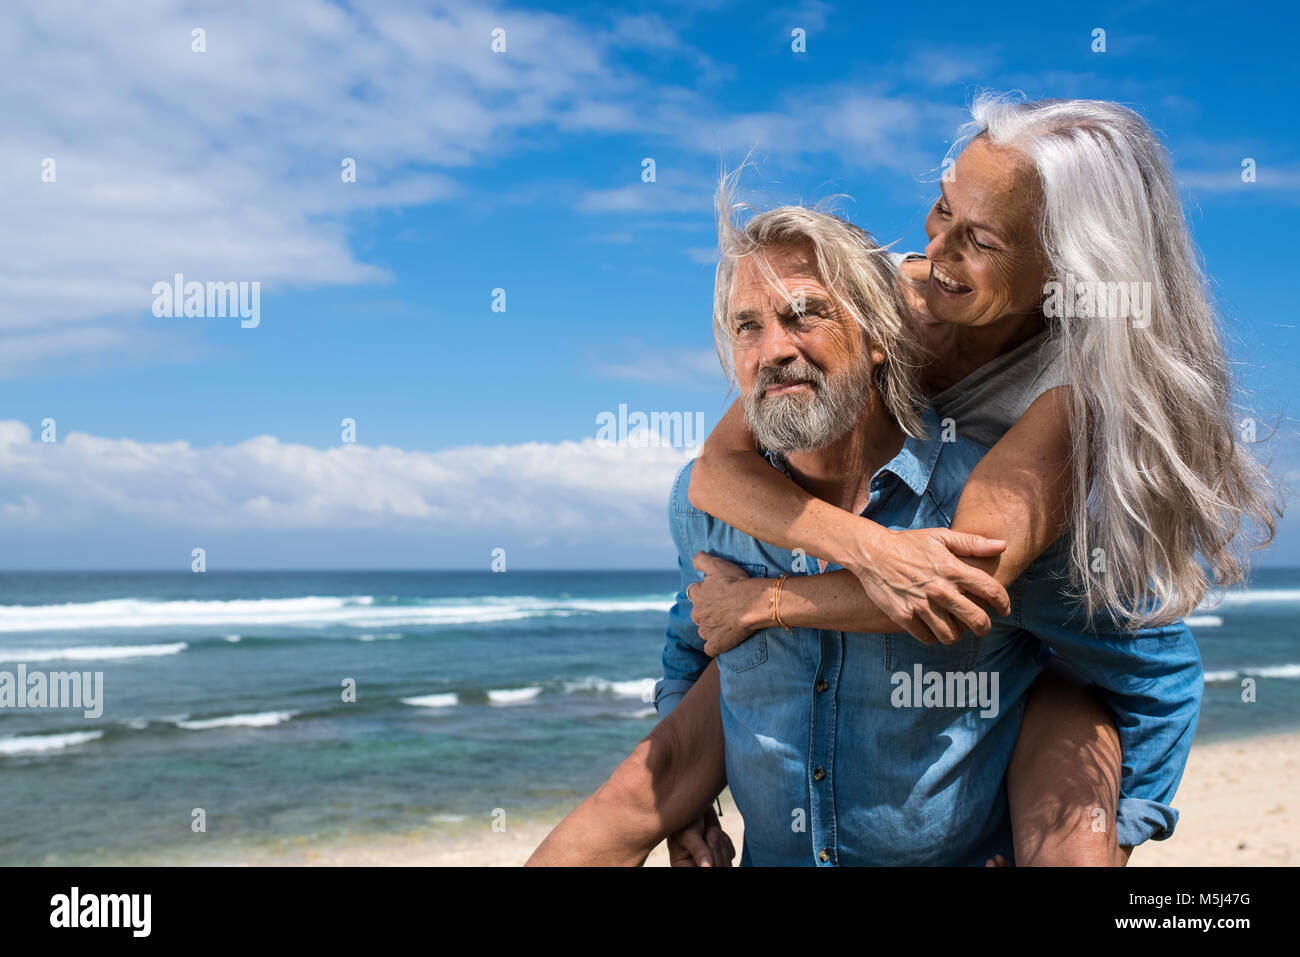 Handsome senior couple having fun at the beach Banque D'Images